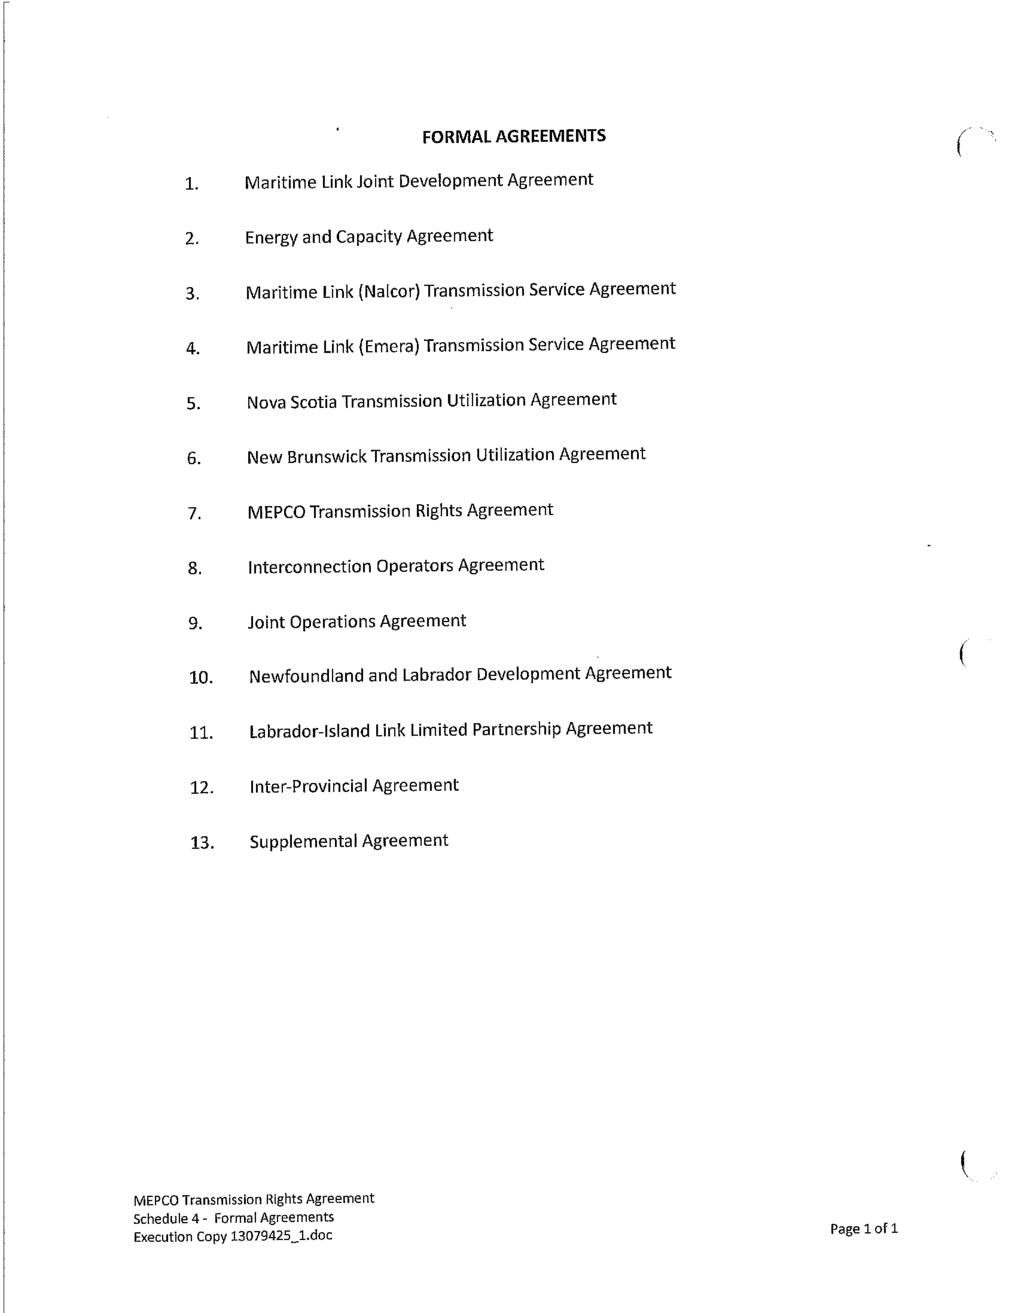 Maritime Link Appendix 2.08 Page 108 of 108 FORMAL AGREEMENTS 1. Maritime Link Joint Development Agreement 2. Energy and Capacity Agreement 3. Maritime Link Nalcor) Transmission Service Agreement 4.